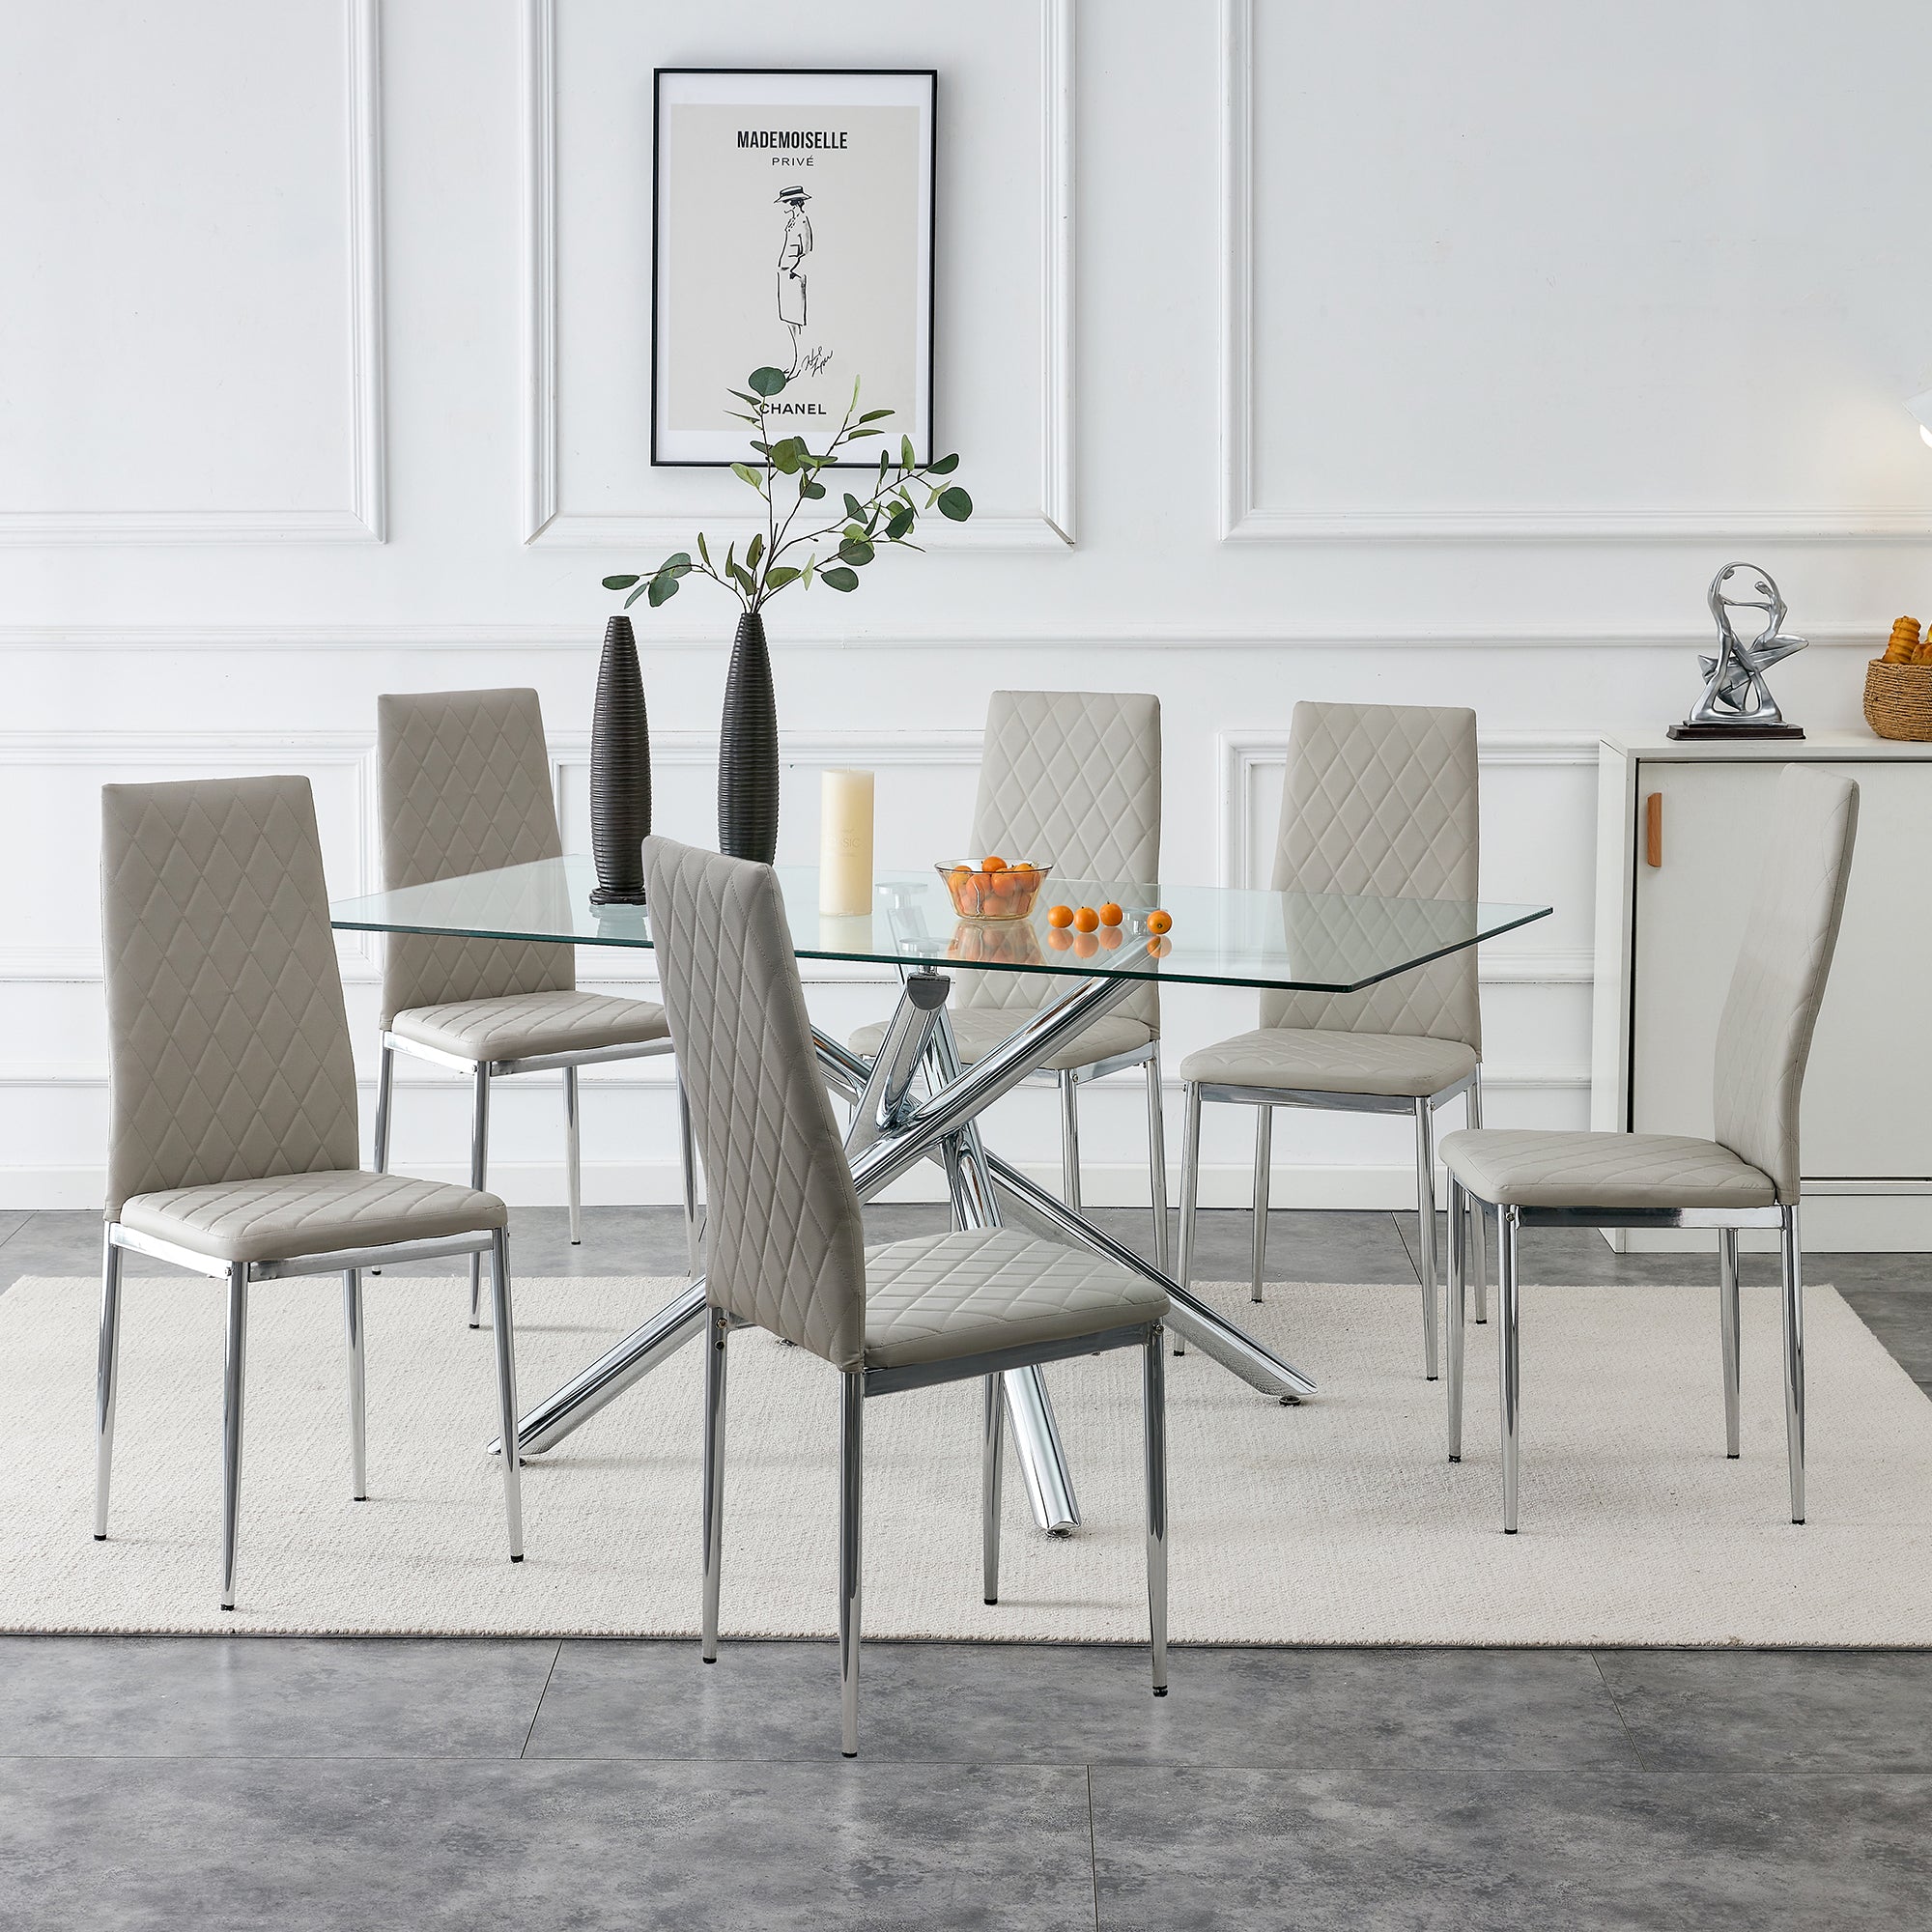 6-piece Set Chairs - Light Grey chairs